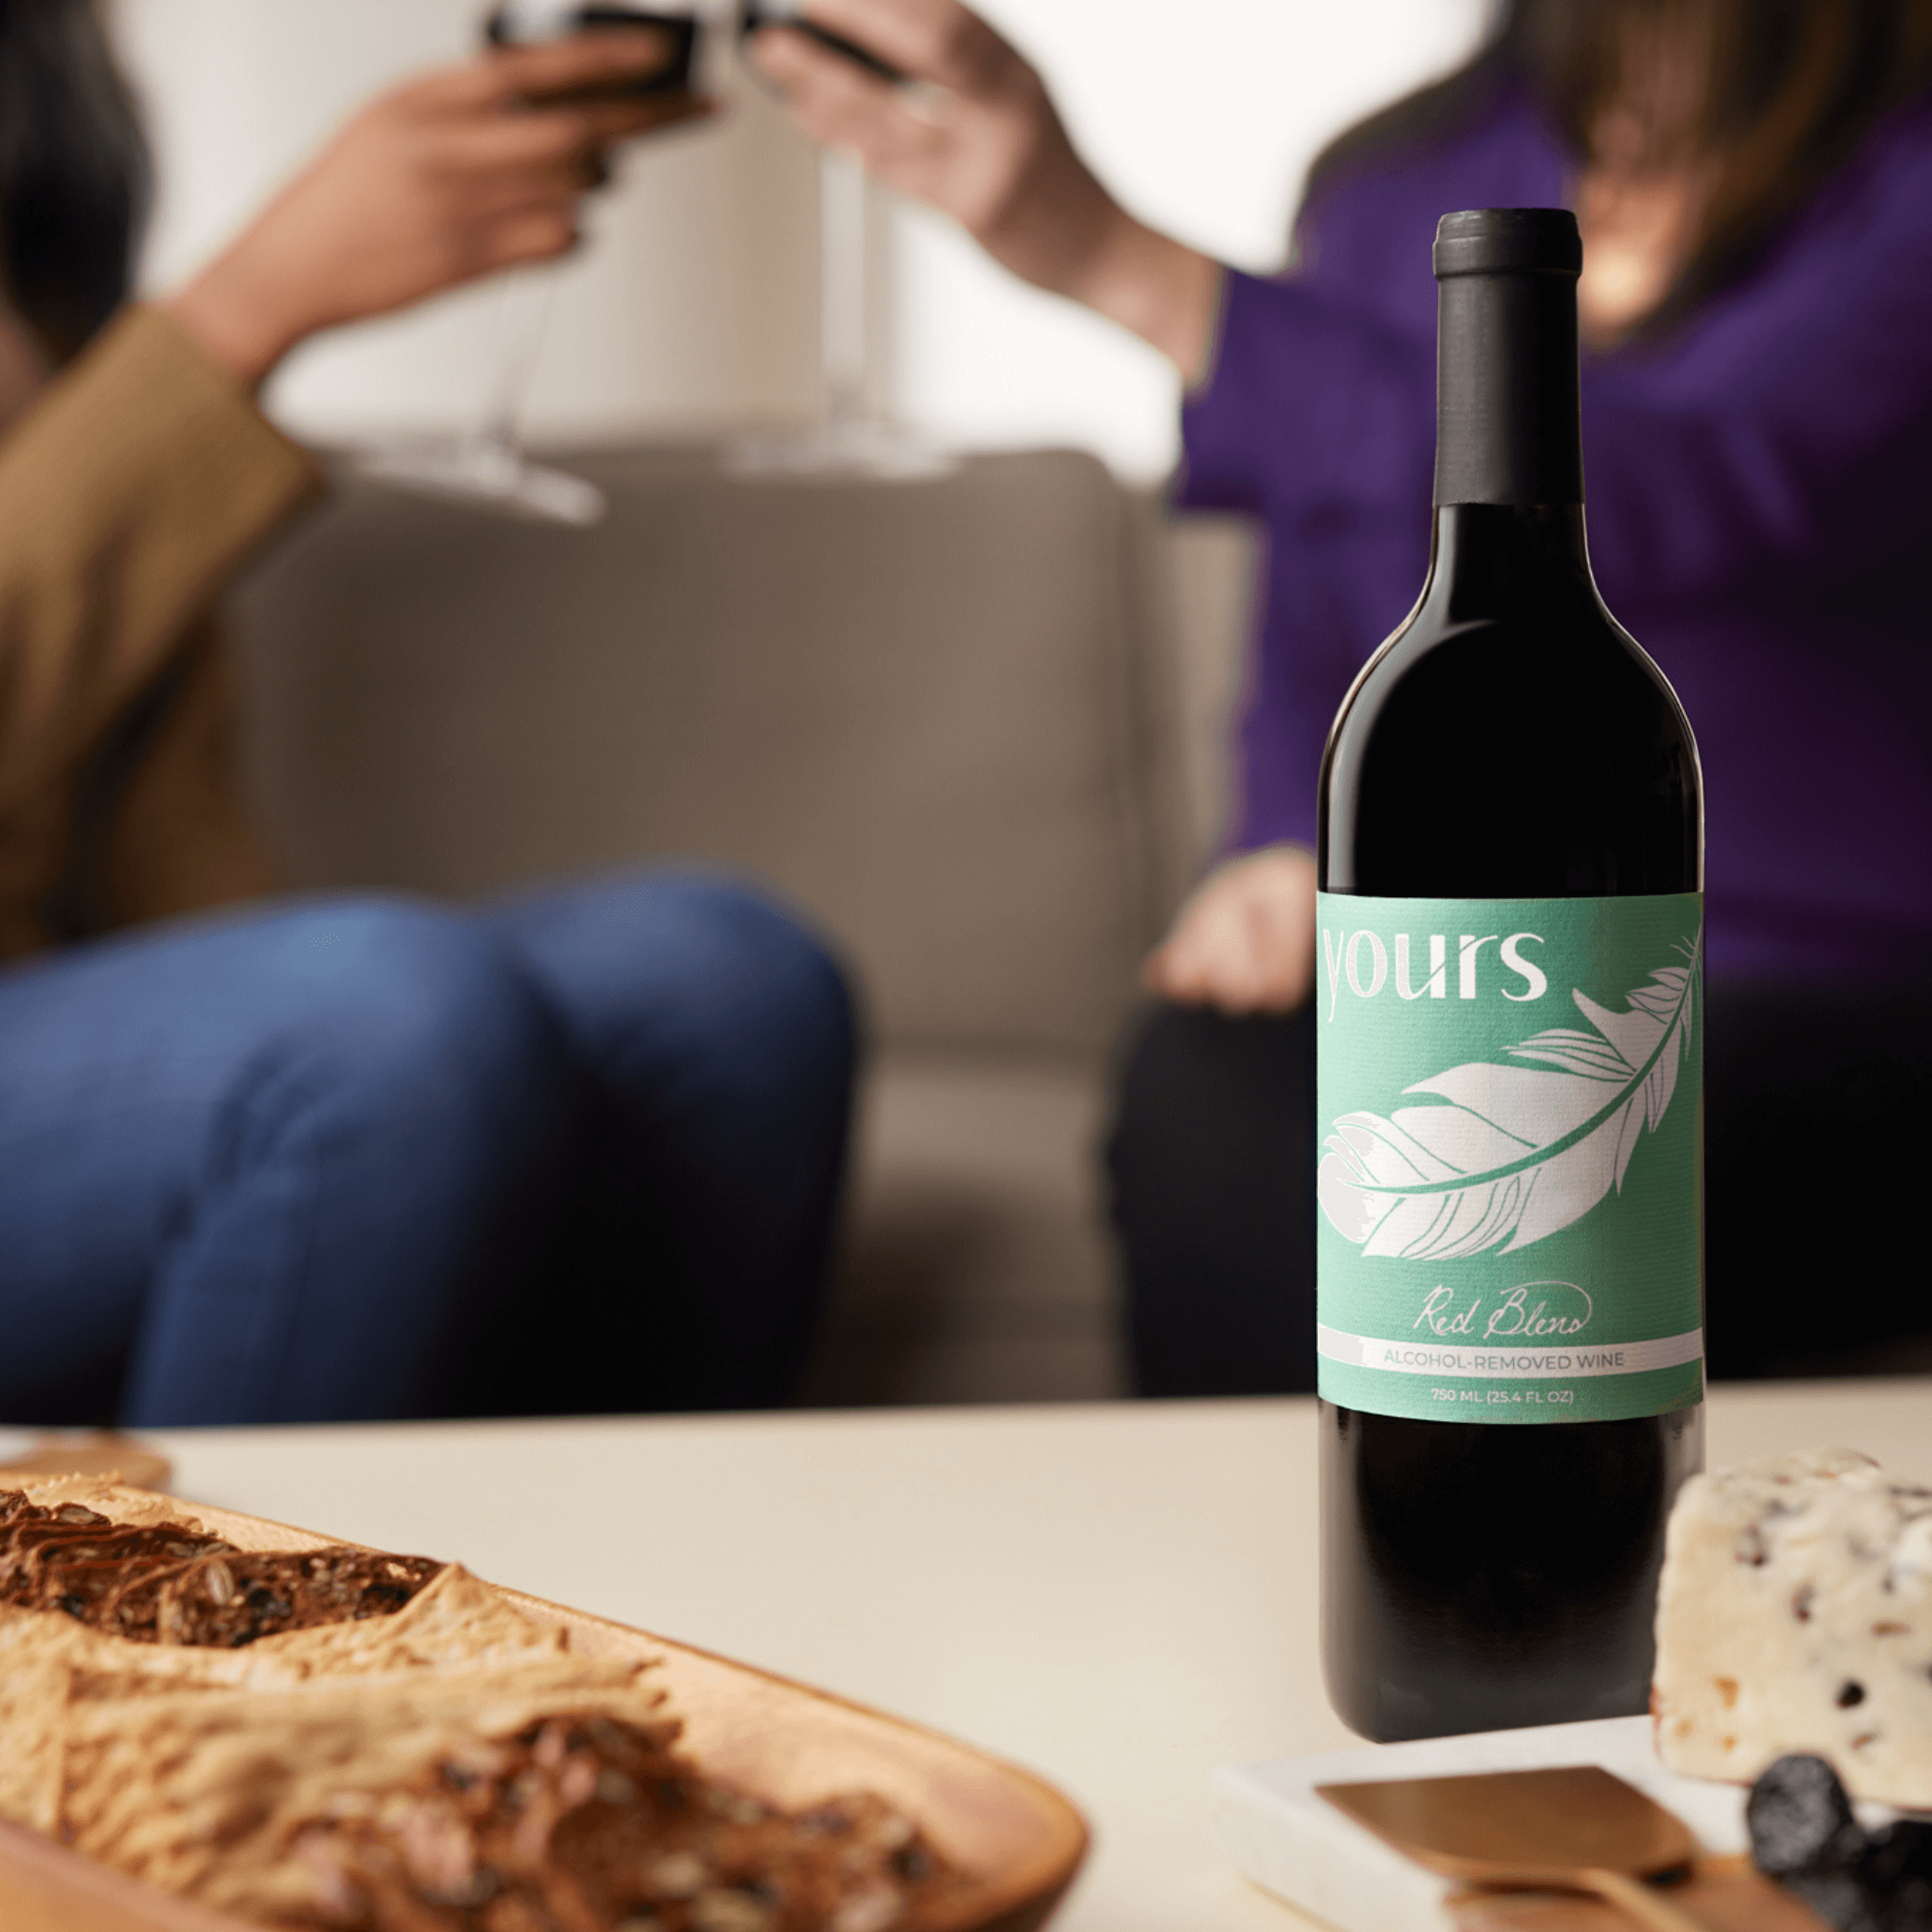 YOURS Non-Alcoholic Award Winning California Red Blend Wine with Cheese